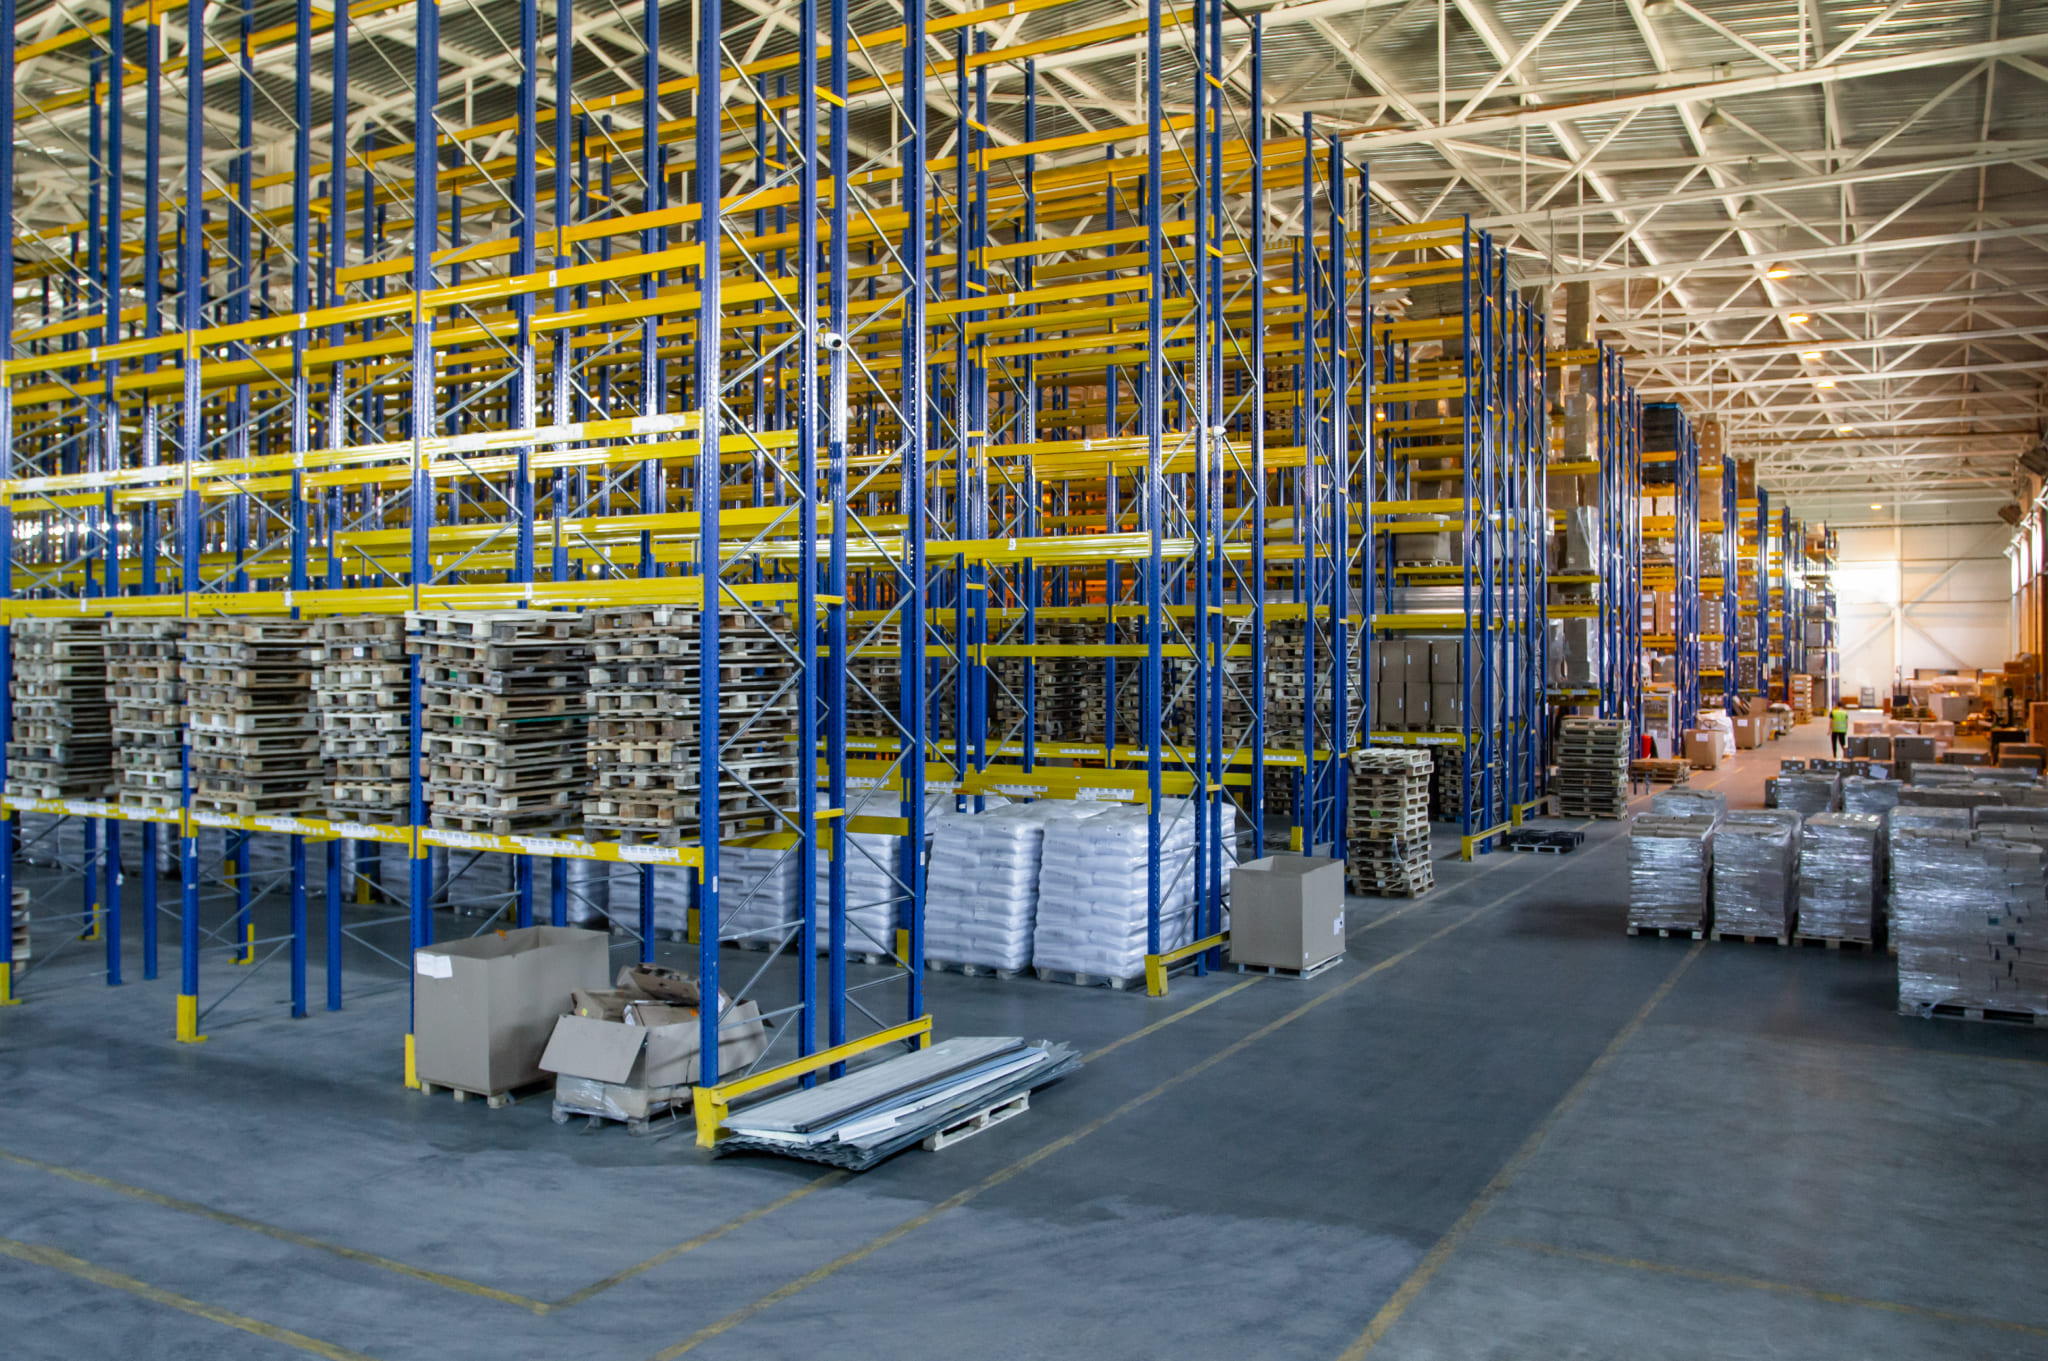 Assembly and disassembly of push-back pallet racking